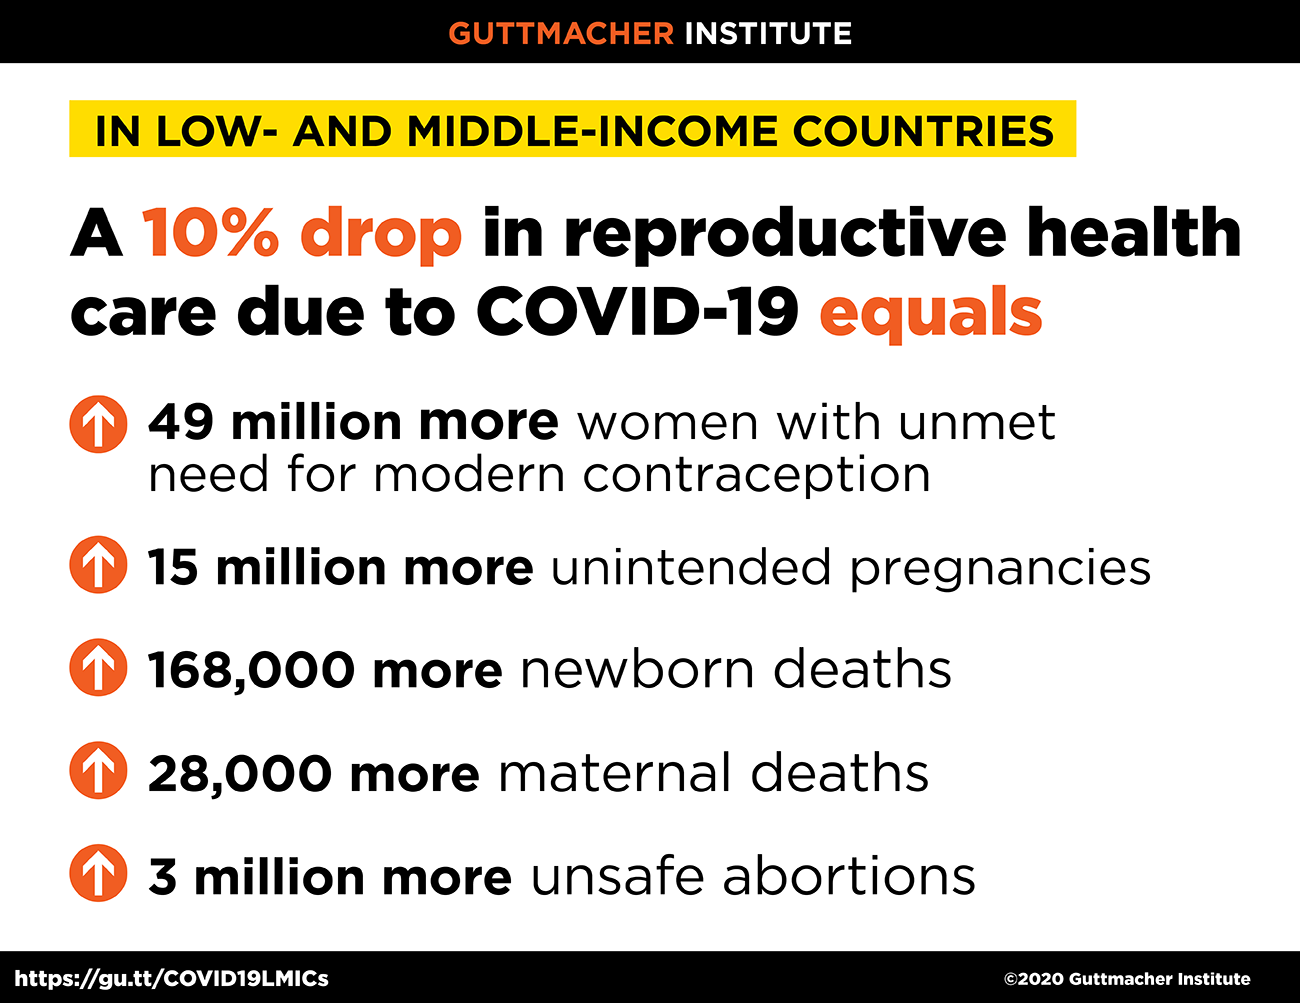 In low- and middle-income countries, a 10% drop in reproductive health care due to COVID-19 equals 49 million more women with unmet need for modern contraception